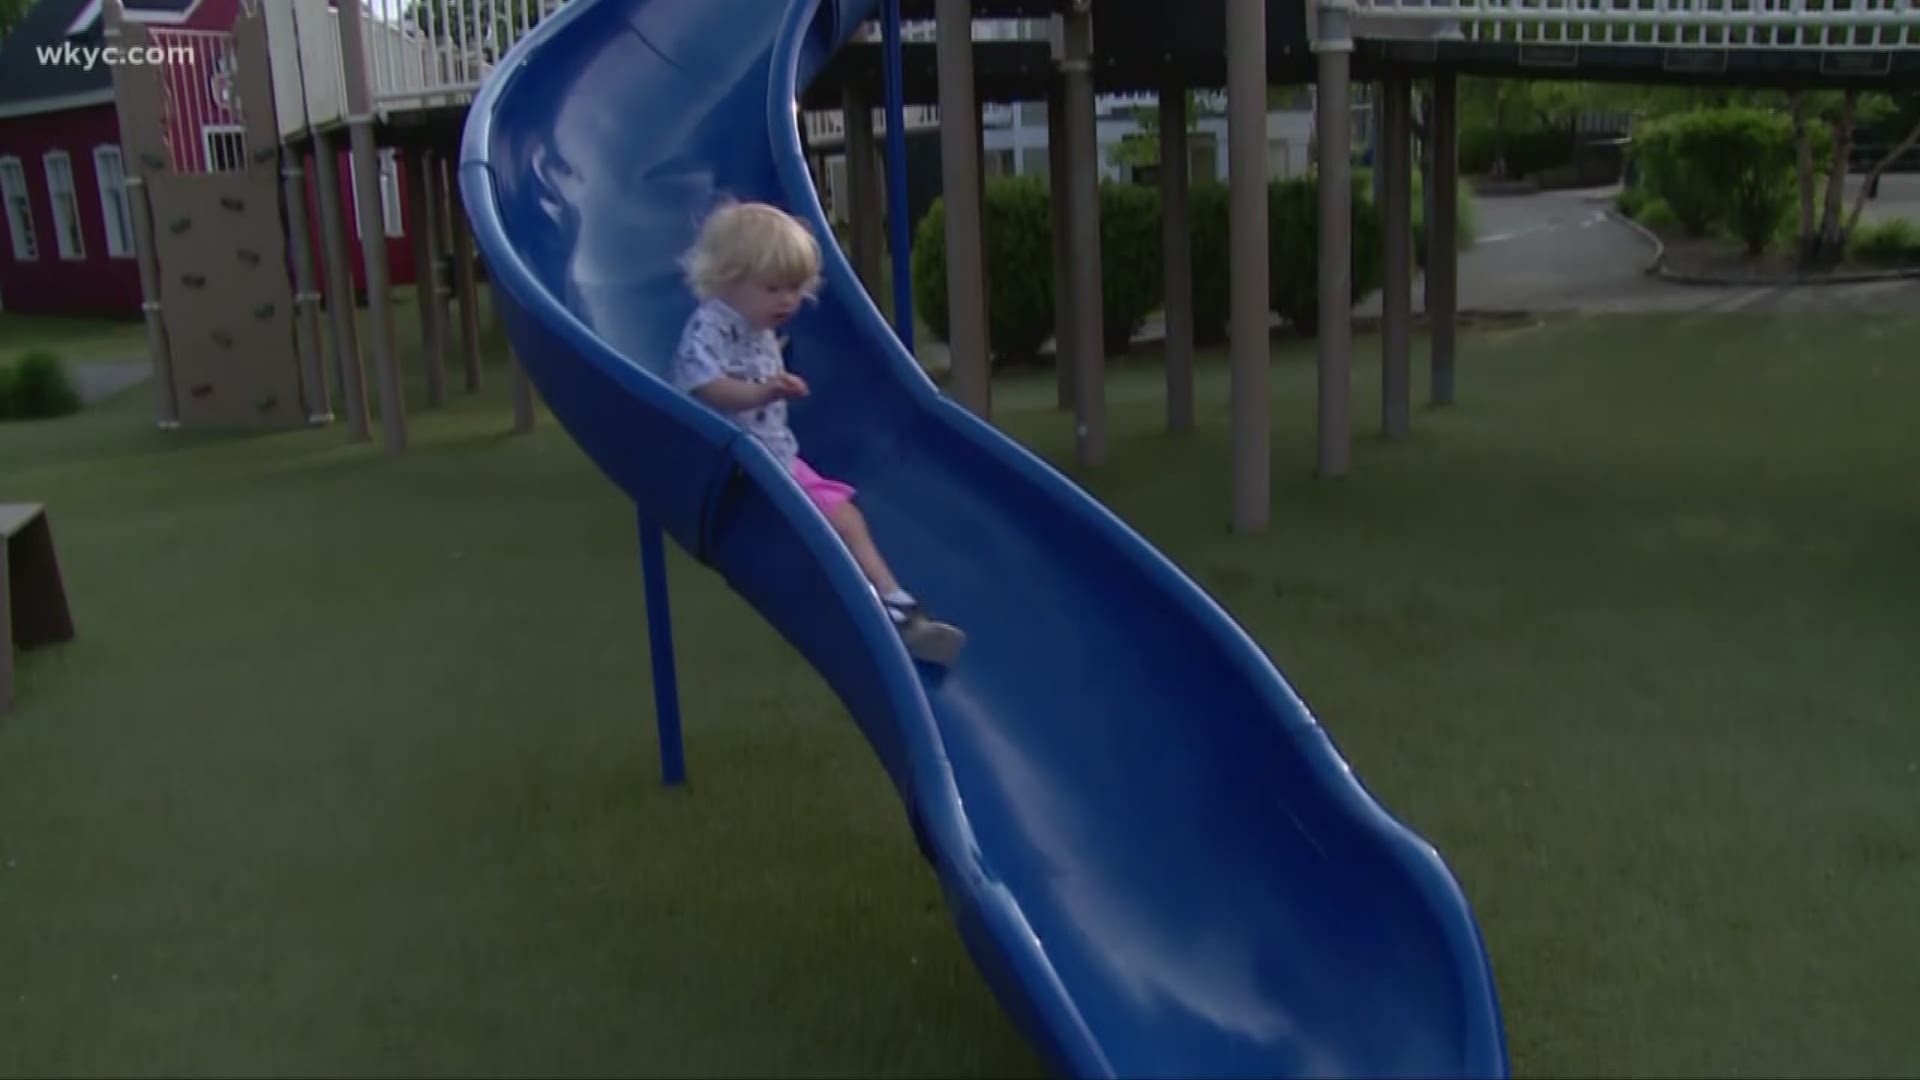 July 16, 2018: Looking for something to do with your kids this summer? WKYC's Alexa Lee takes us inside the Preston's H.O.P.E. Playground Park.